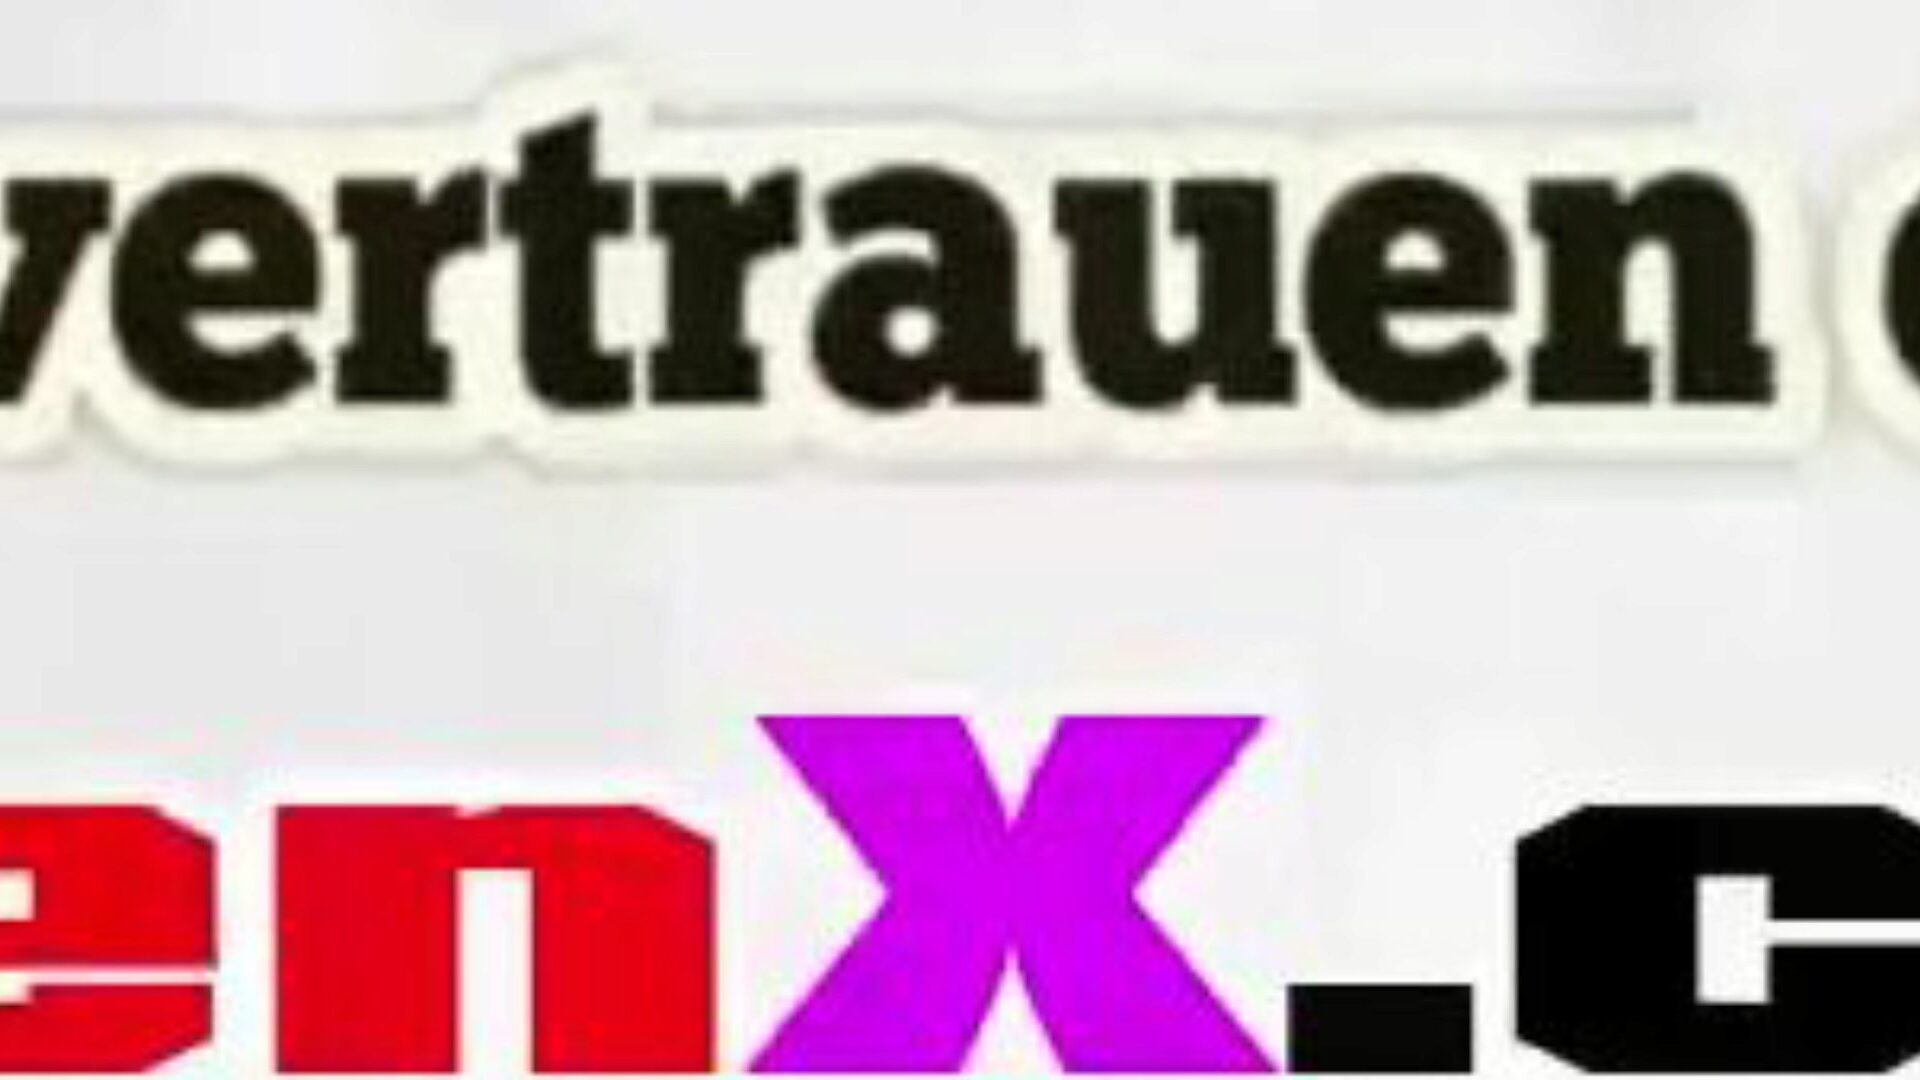 Stiefmutter Gefickt: Free Mutter German HD Porn Video f5 Watch Stiefmutter Gefickt tube fuckfest video for free-for-all on xHamster, with the astonishing collection of German Mutter German & Mutter Tochter HD pornography movie scene episodes